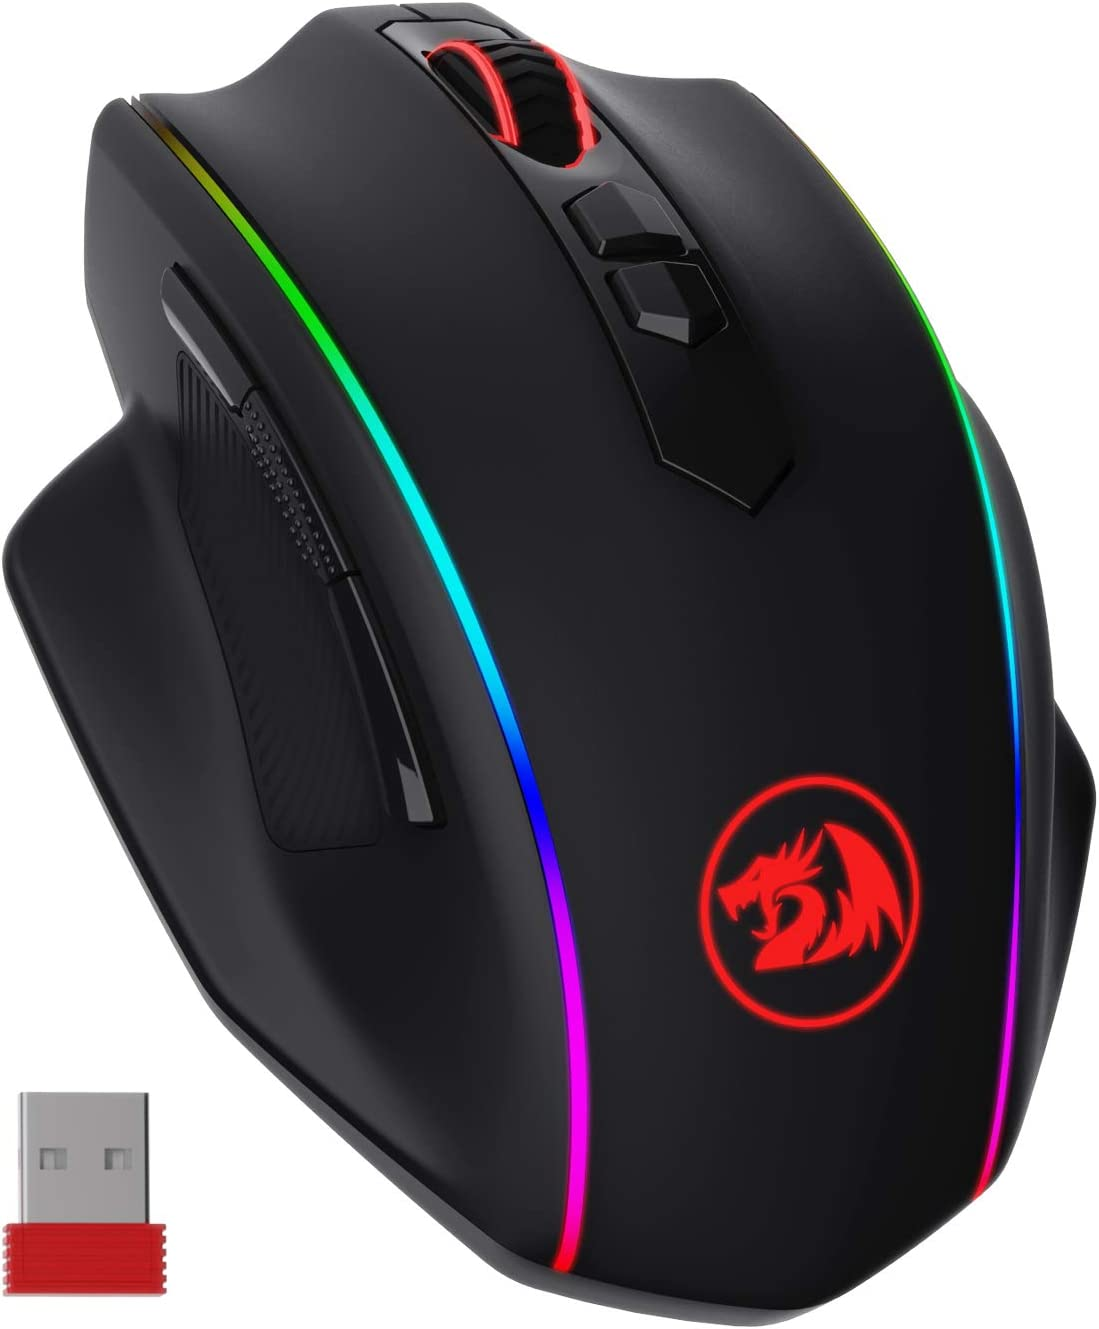 A gaming mouse that is suitable for FPS games should have a higher DPI and a button to change or adjust DPI when necessary.